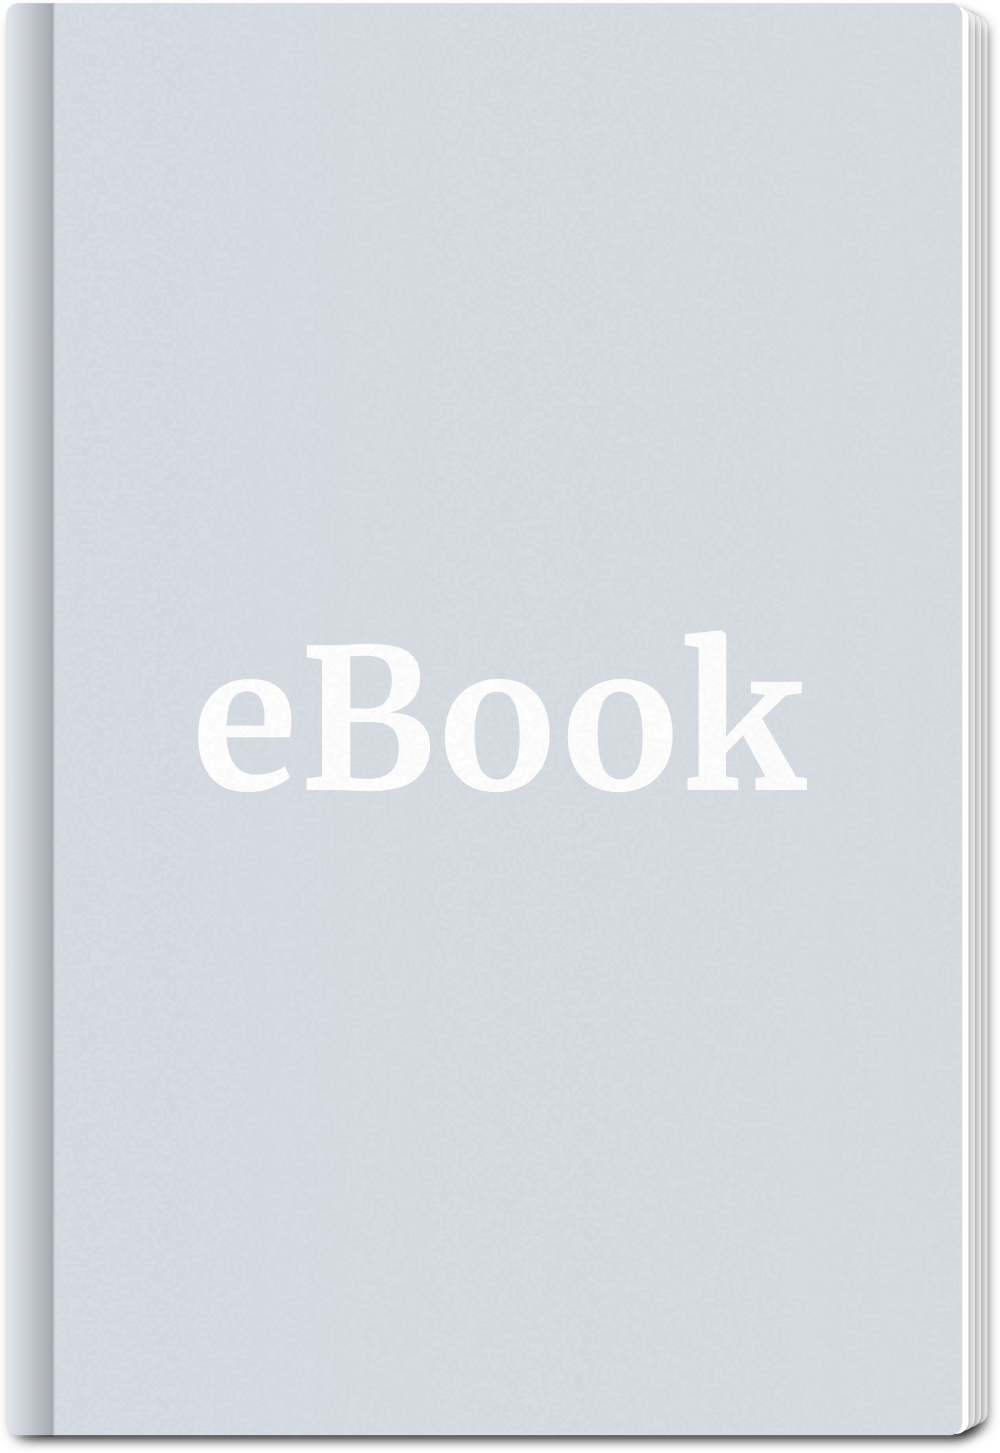 Cover of an ebook